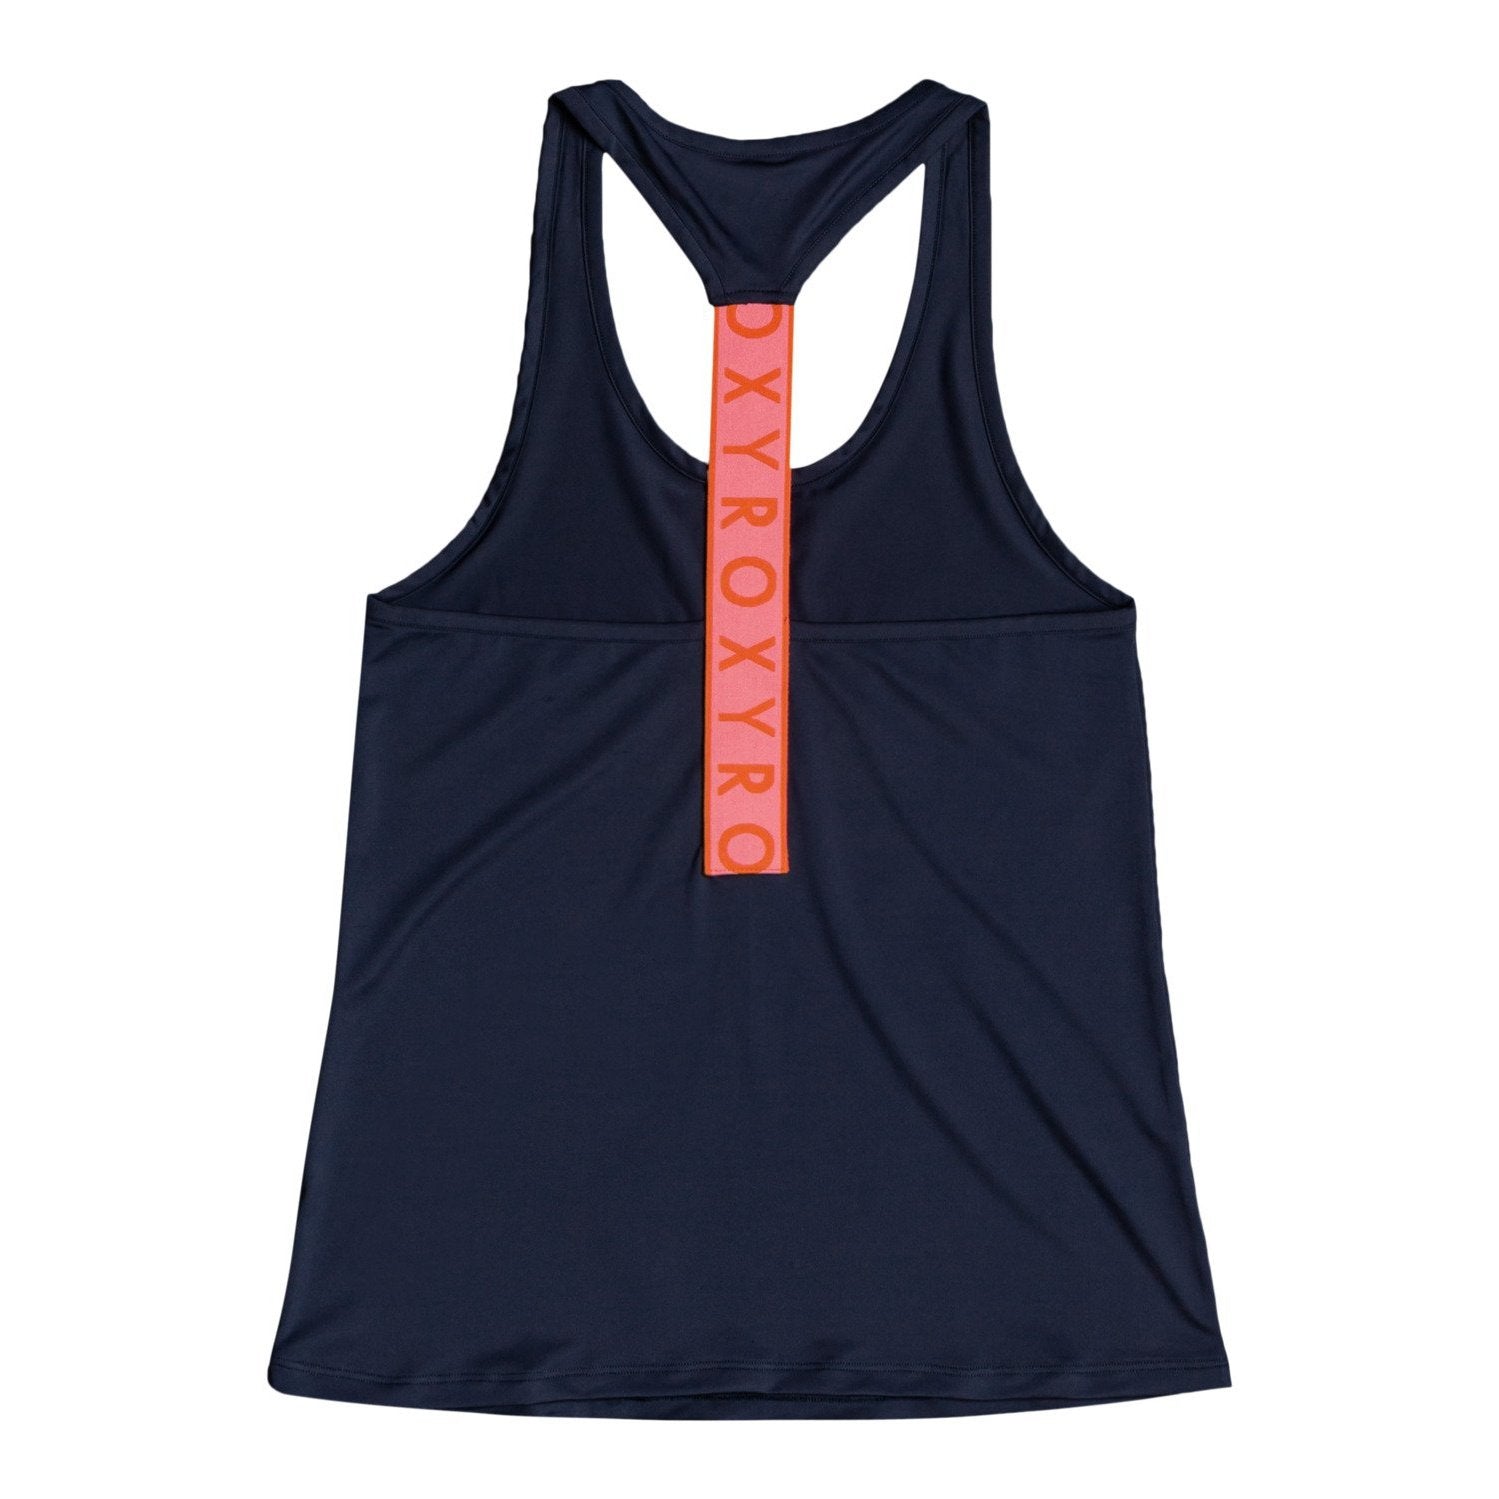 Saturday Night Alright - Technical Vest Top for Women - Sporty Pro